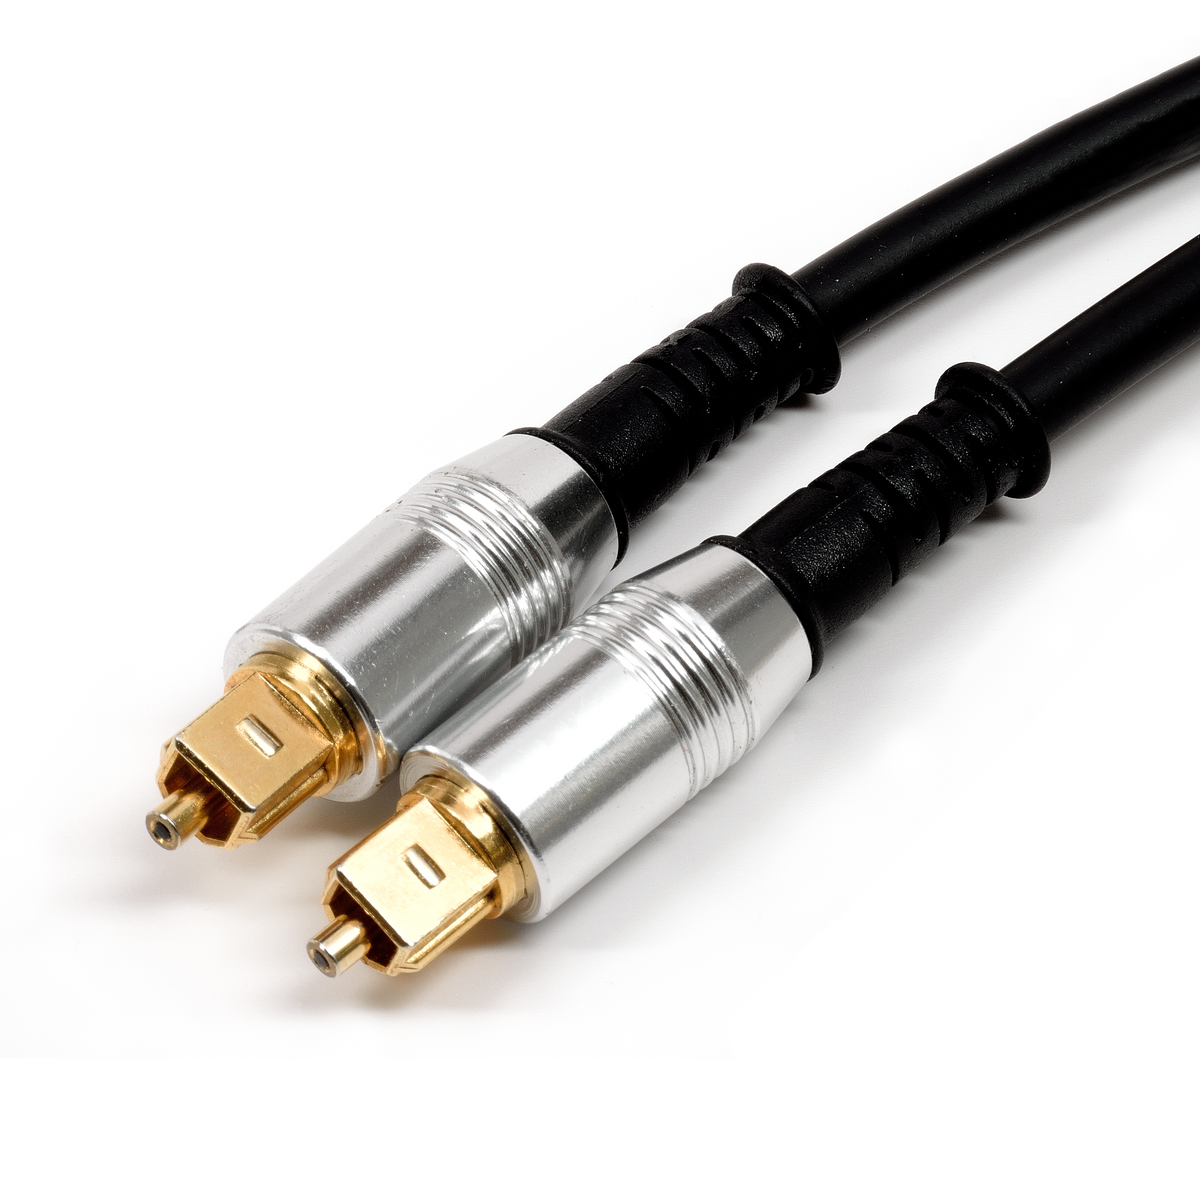 TOSLINK Digital Audio Cable with Metal Ends